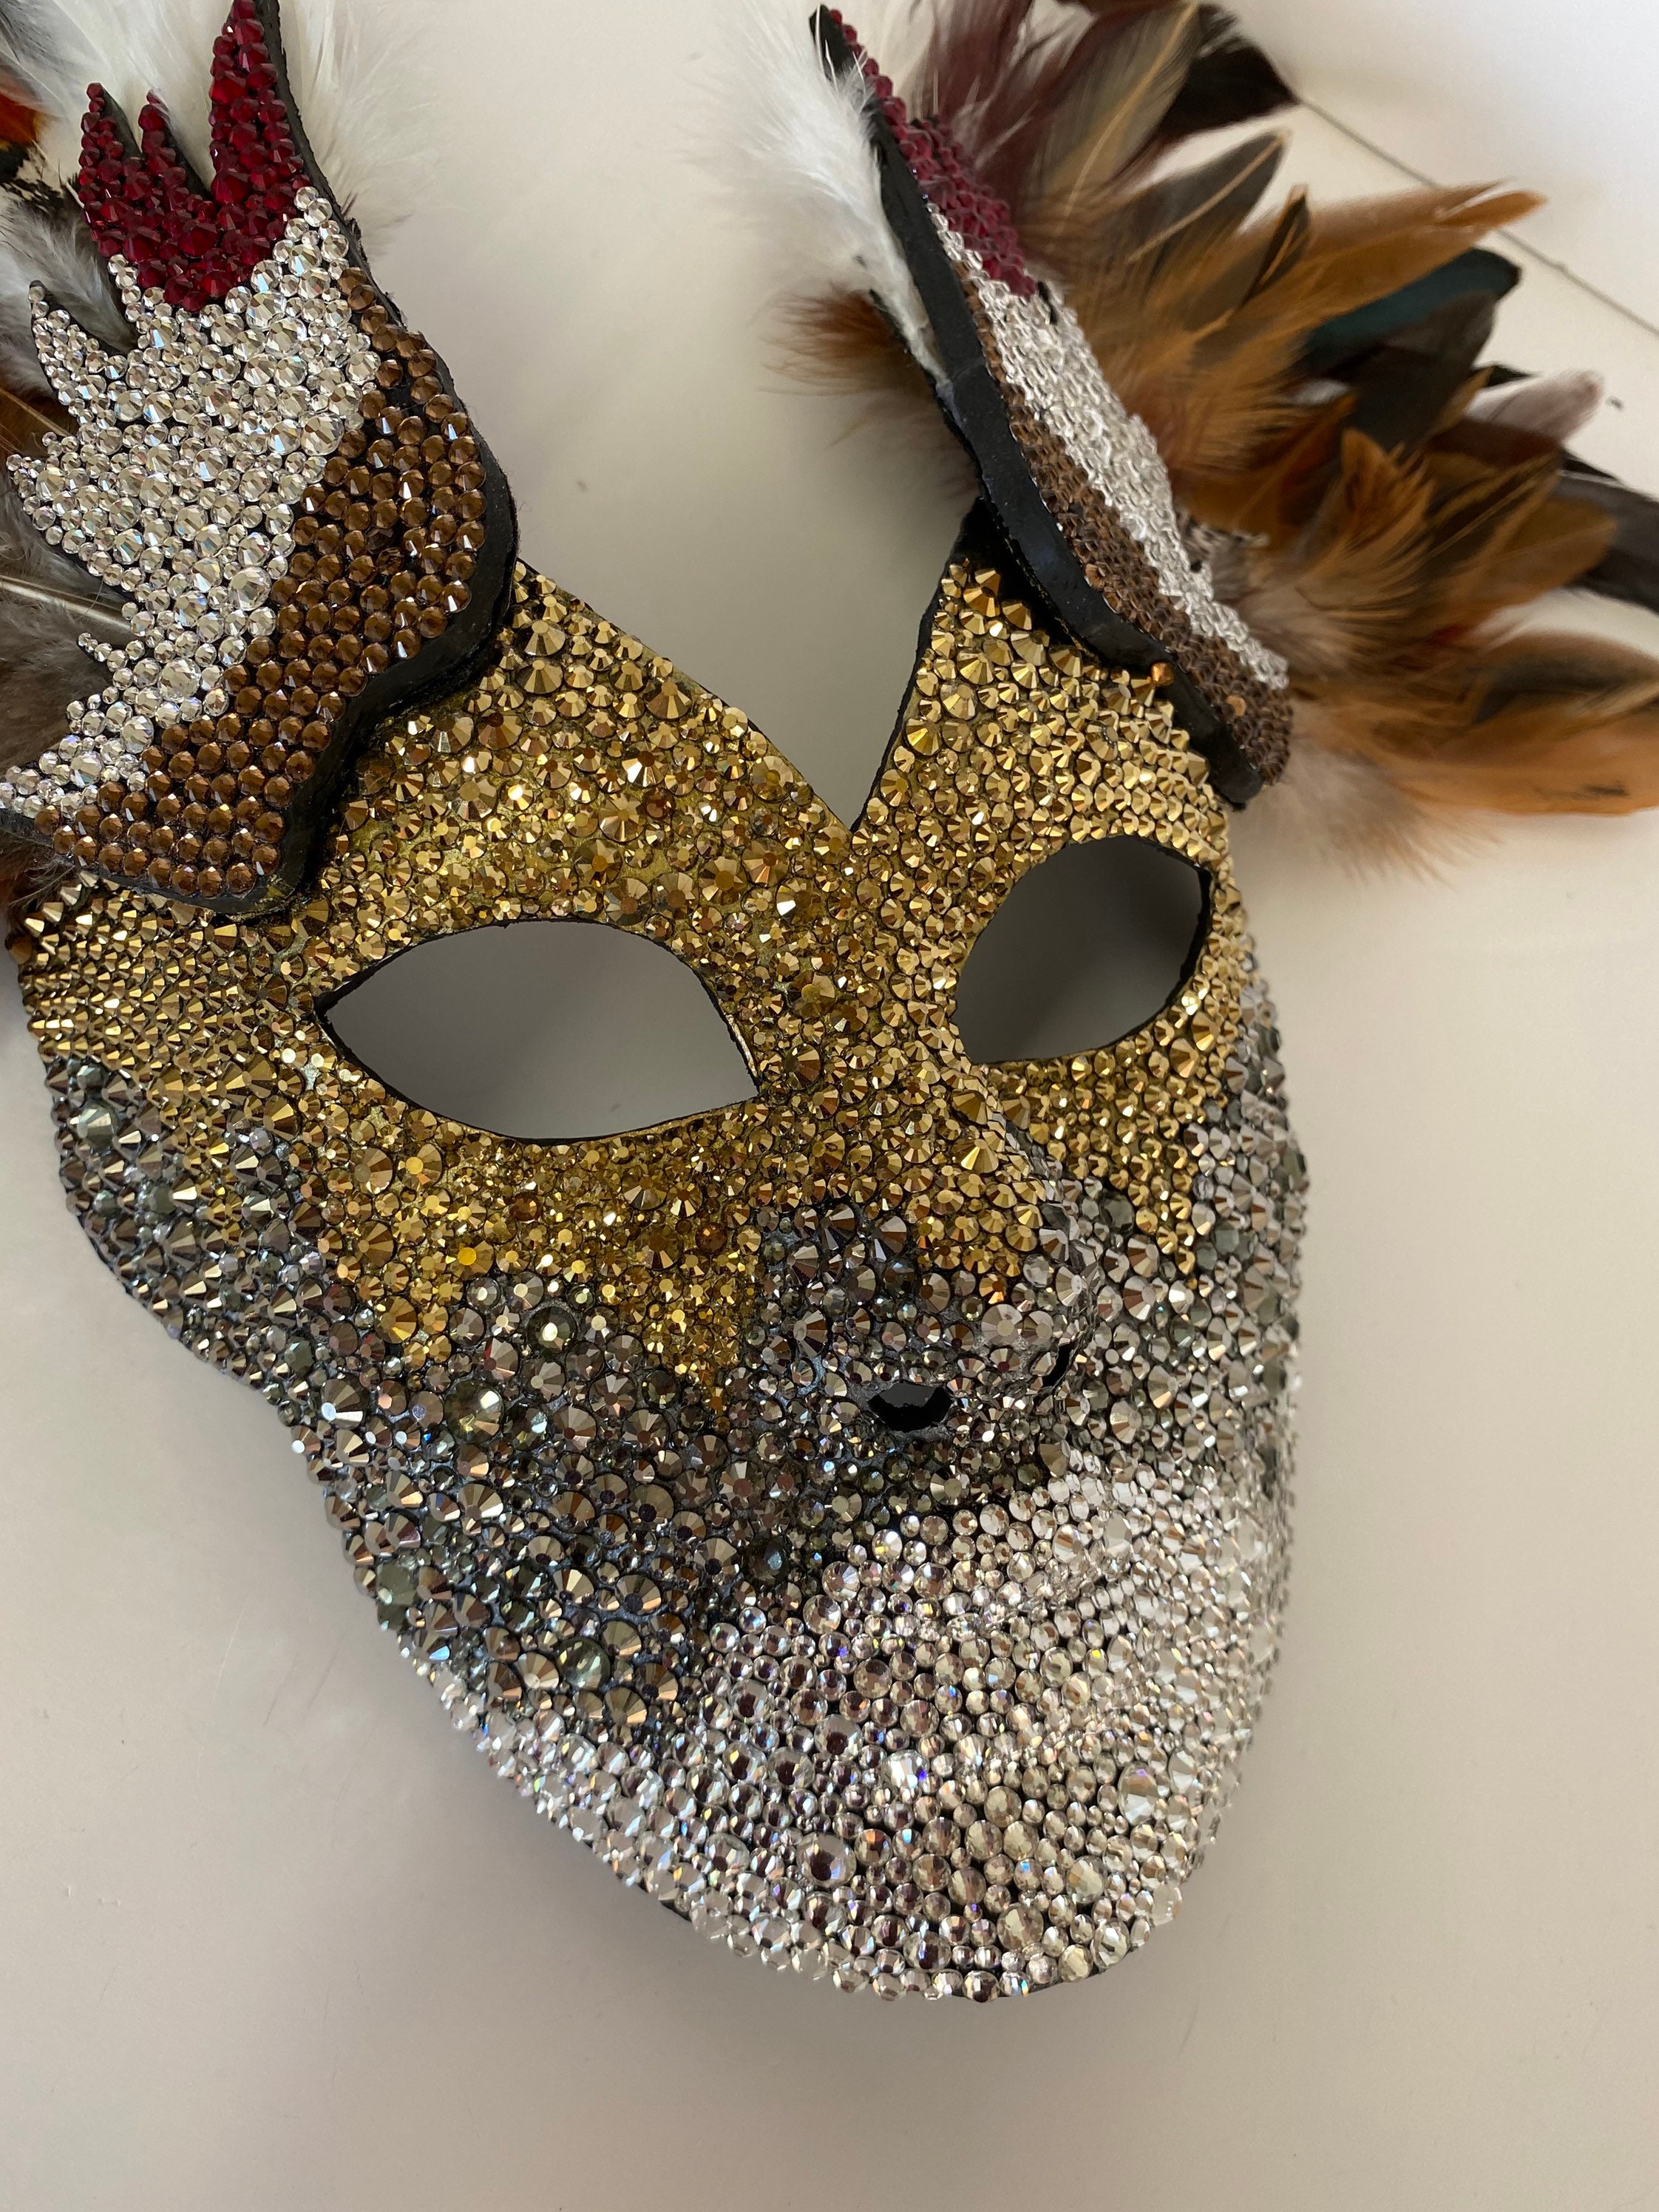 Masquerade Mask - White - Rhinestone And Feathers - Tassels from Apollo Box